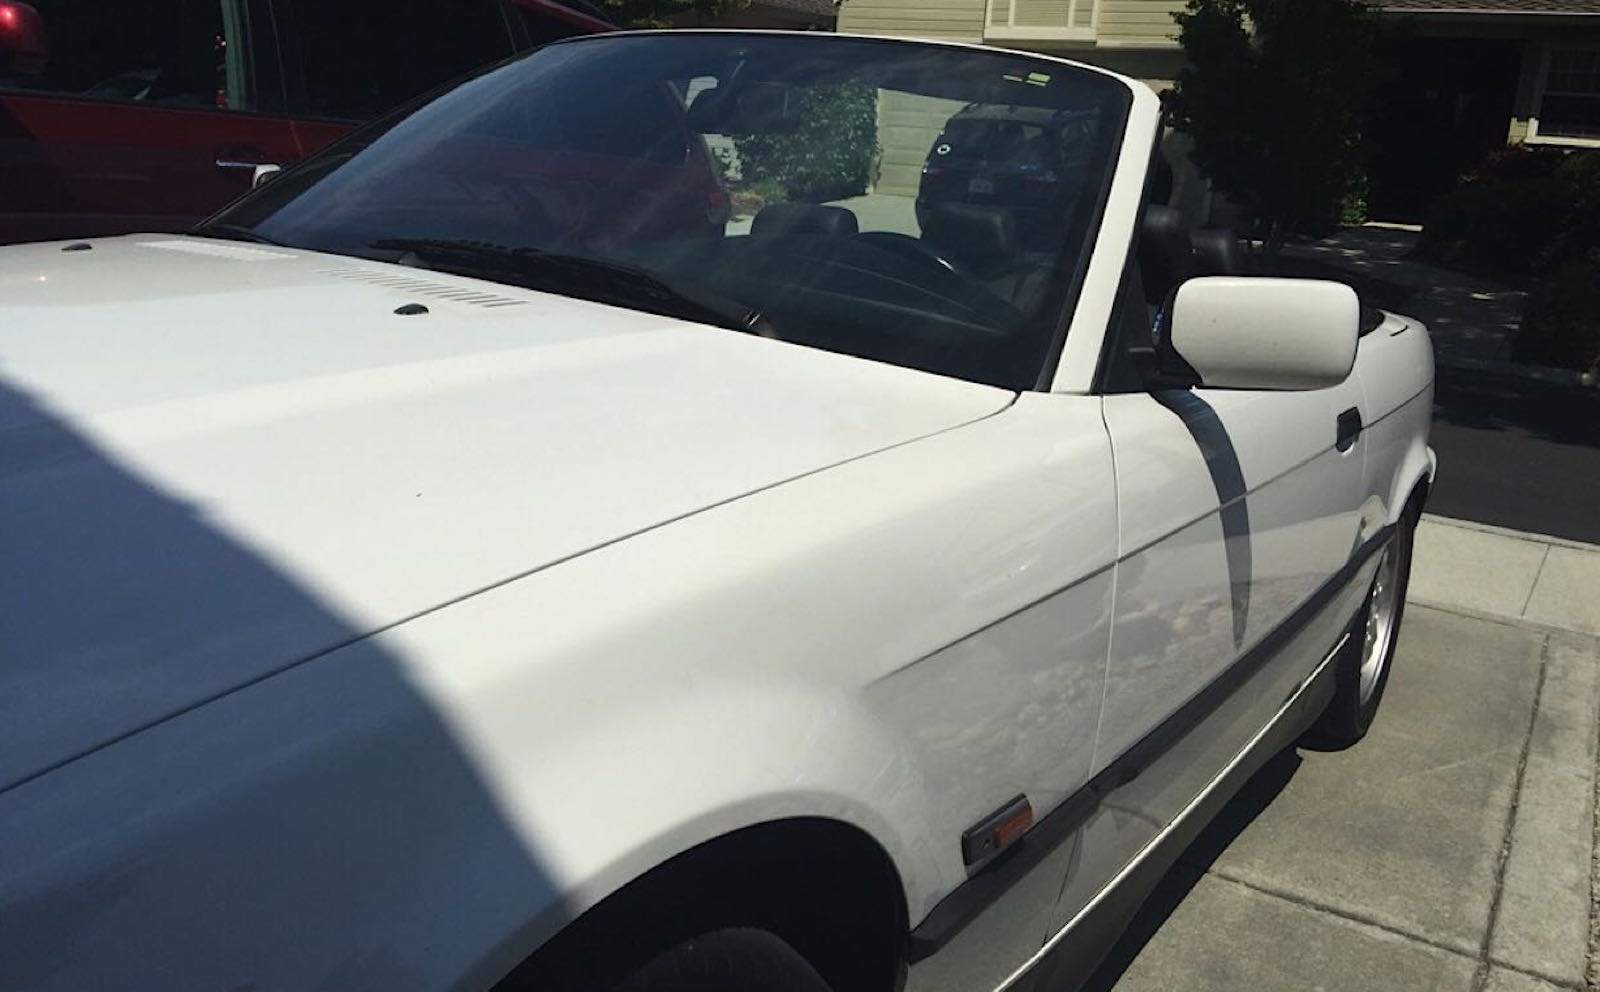 You can now own Steve Jobs' BMW.